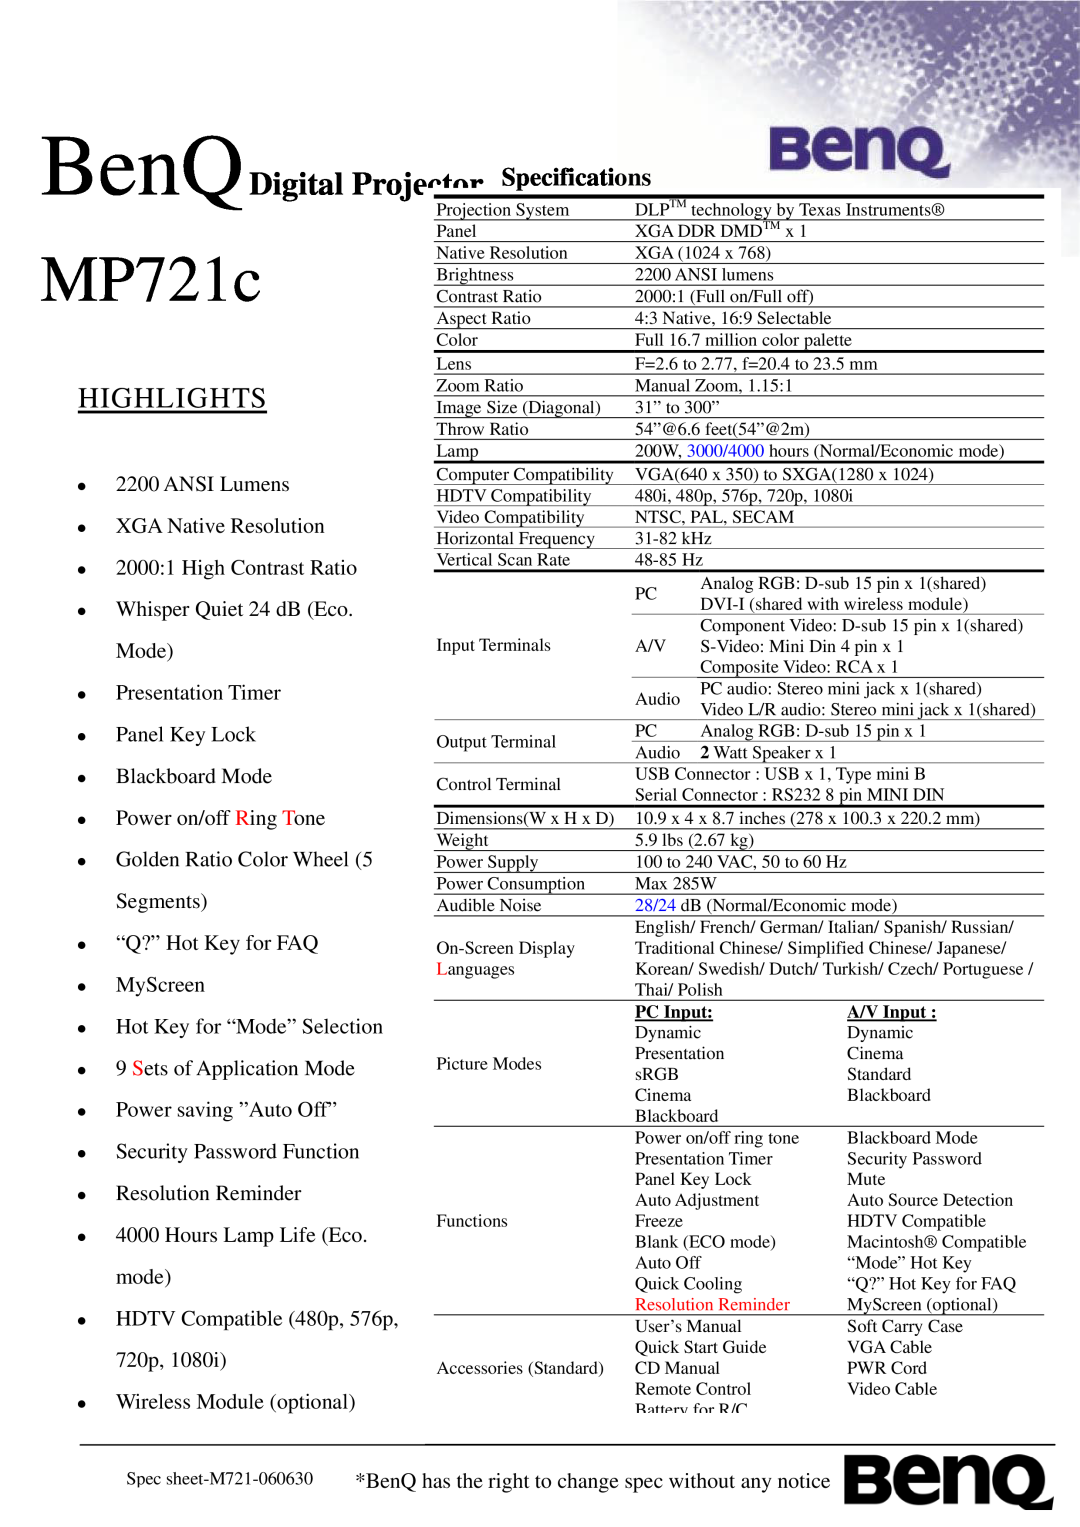 BenQ MP721C specifications MP721c, BenQDigital, Highlights, Projector Specifications 